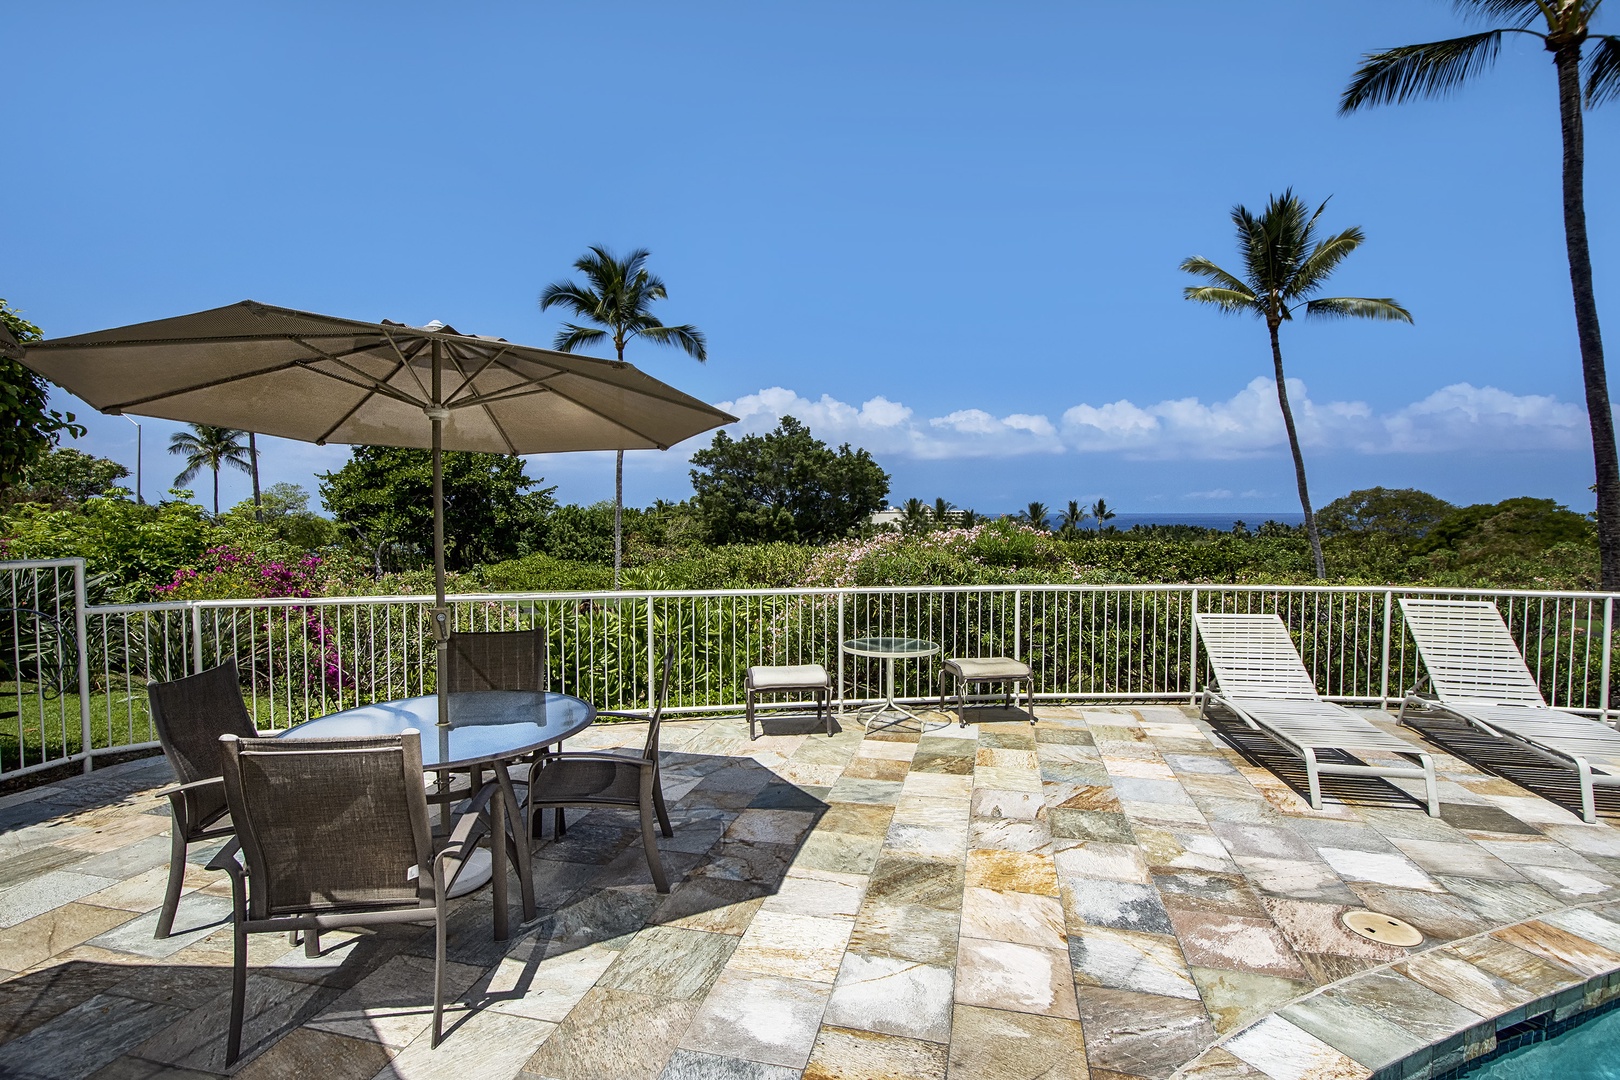 Kailua Kona Vacation Rentals, Keauhou Akahi 302 - Pool Area with tables and chairs and Ocean view, of course